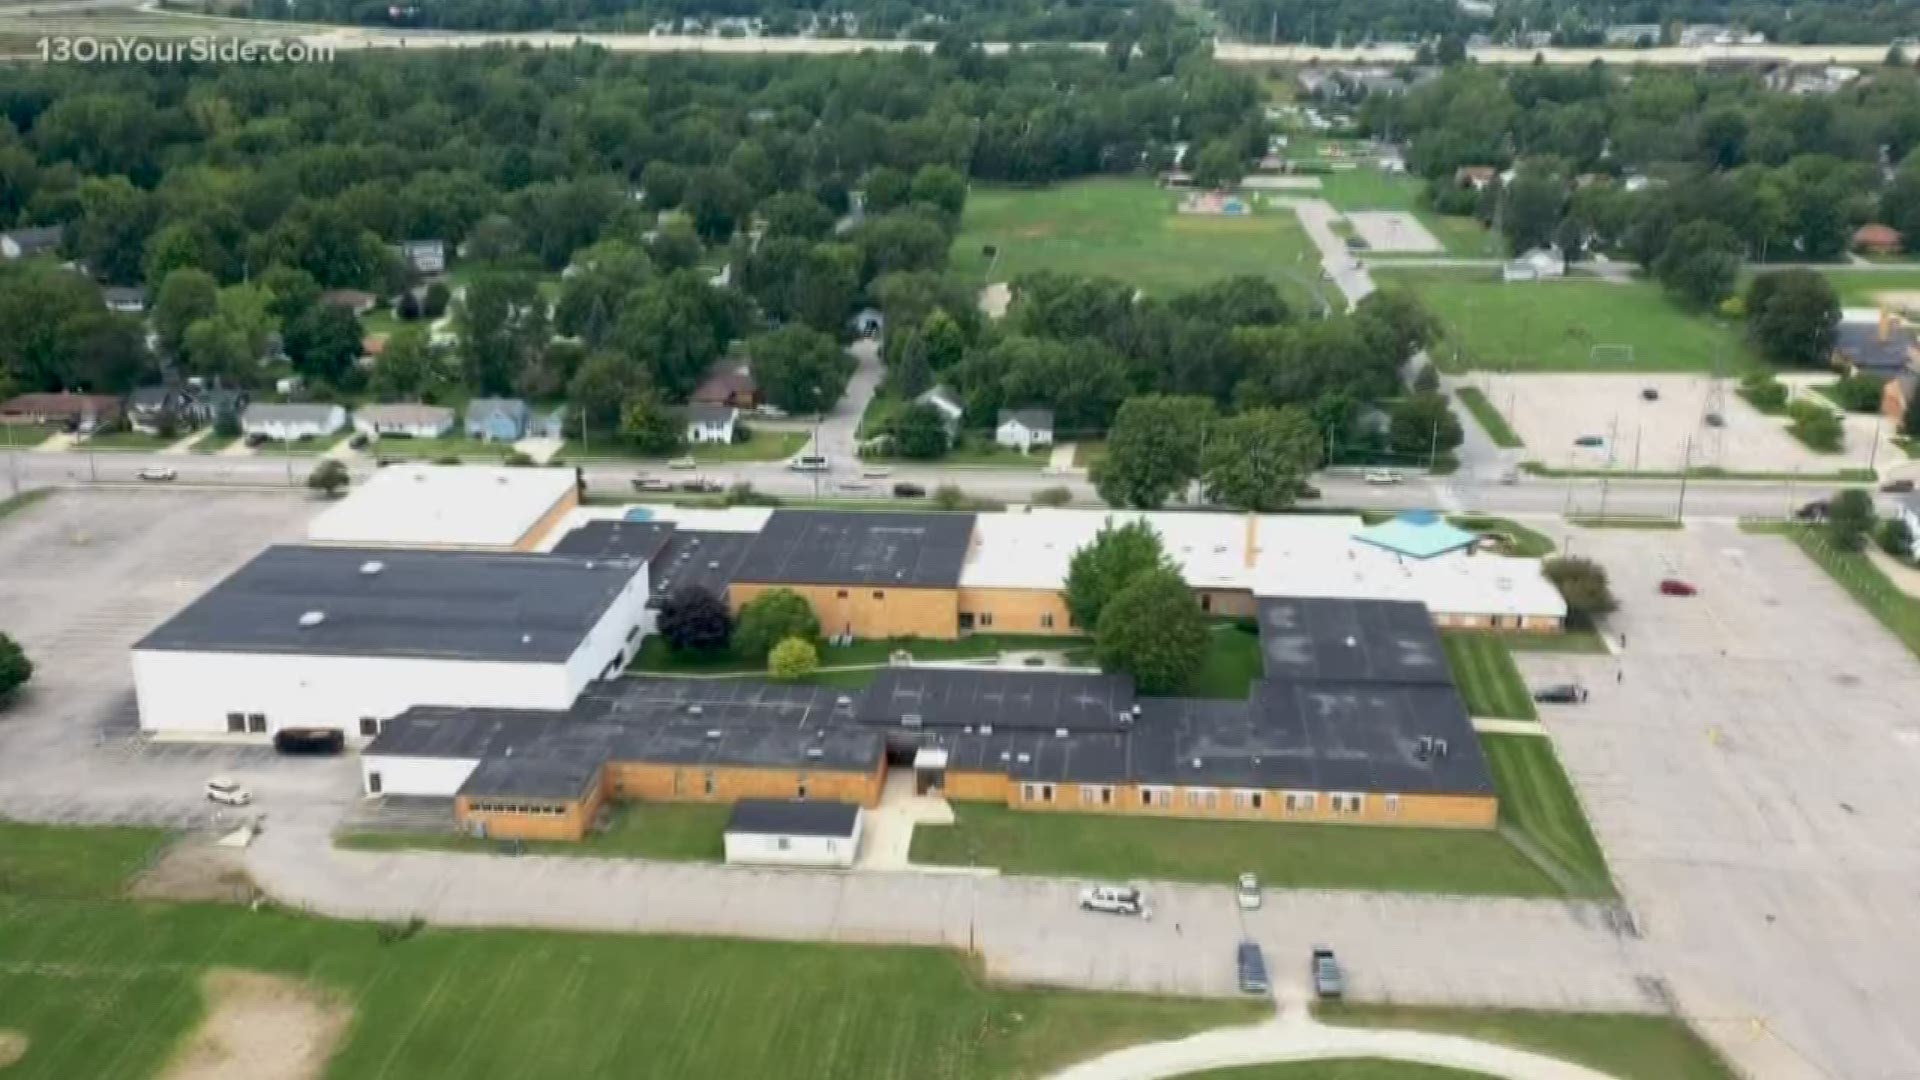 The organization bought the former South Christian High School campus in Byron Township.